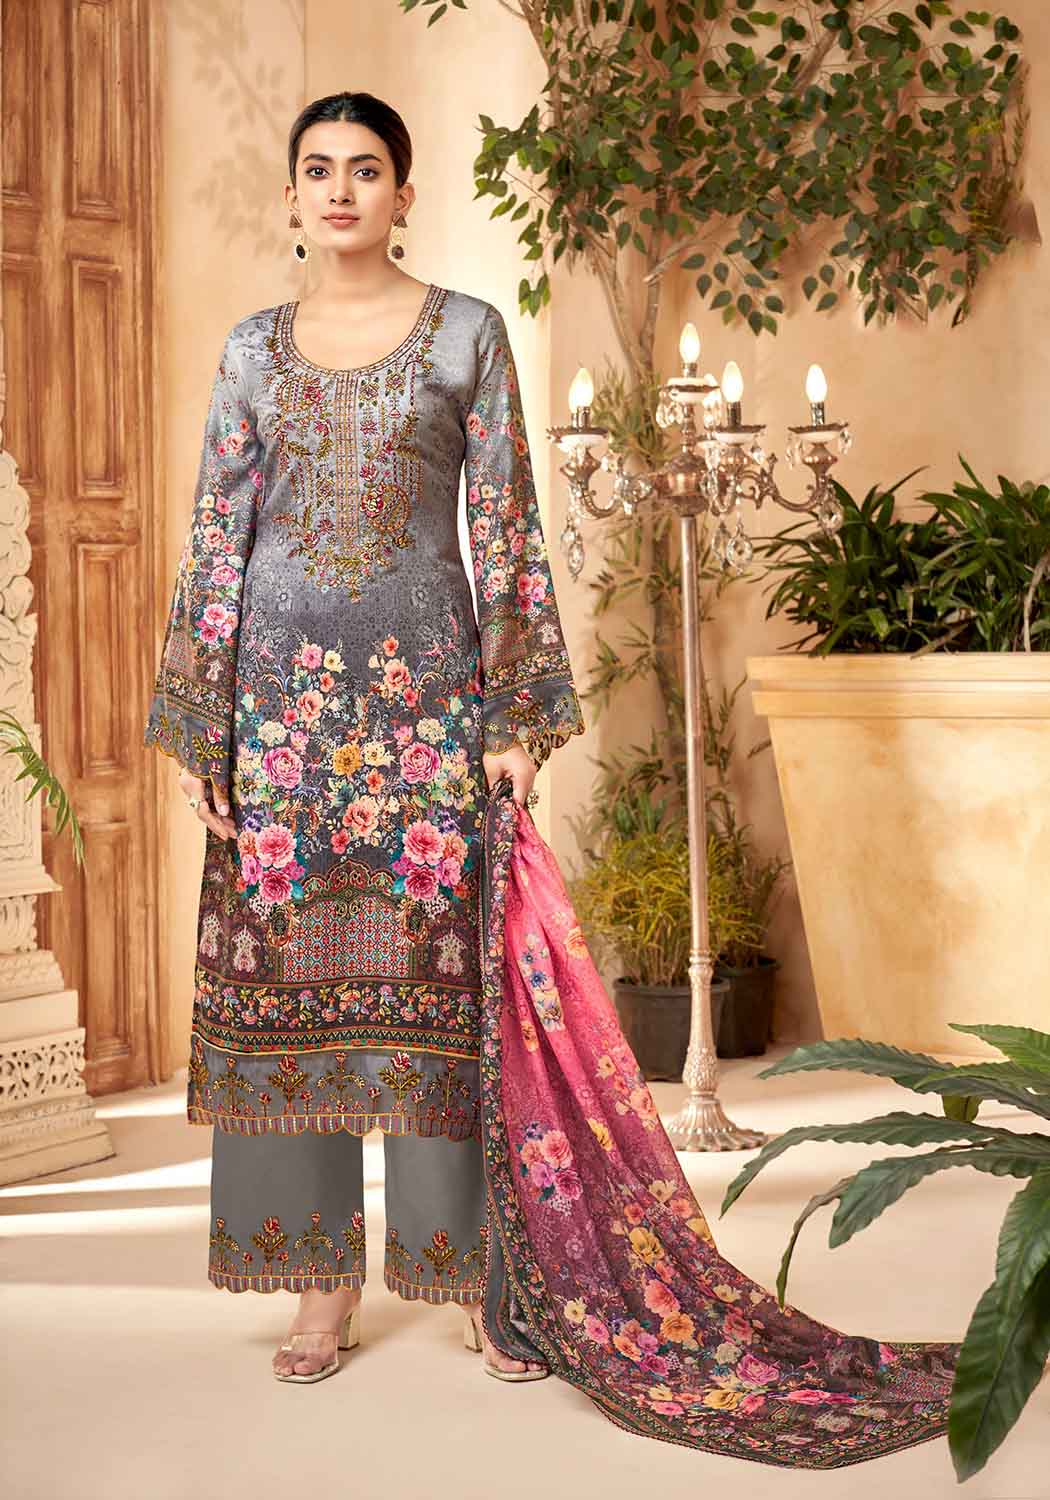 Unstitched Pakistani Print Cotton Suit Material with Embroidery Grey